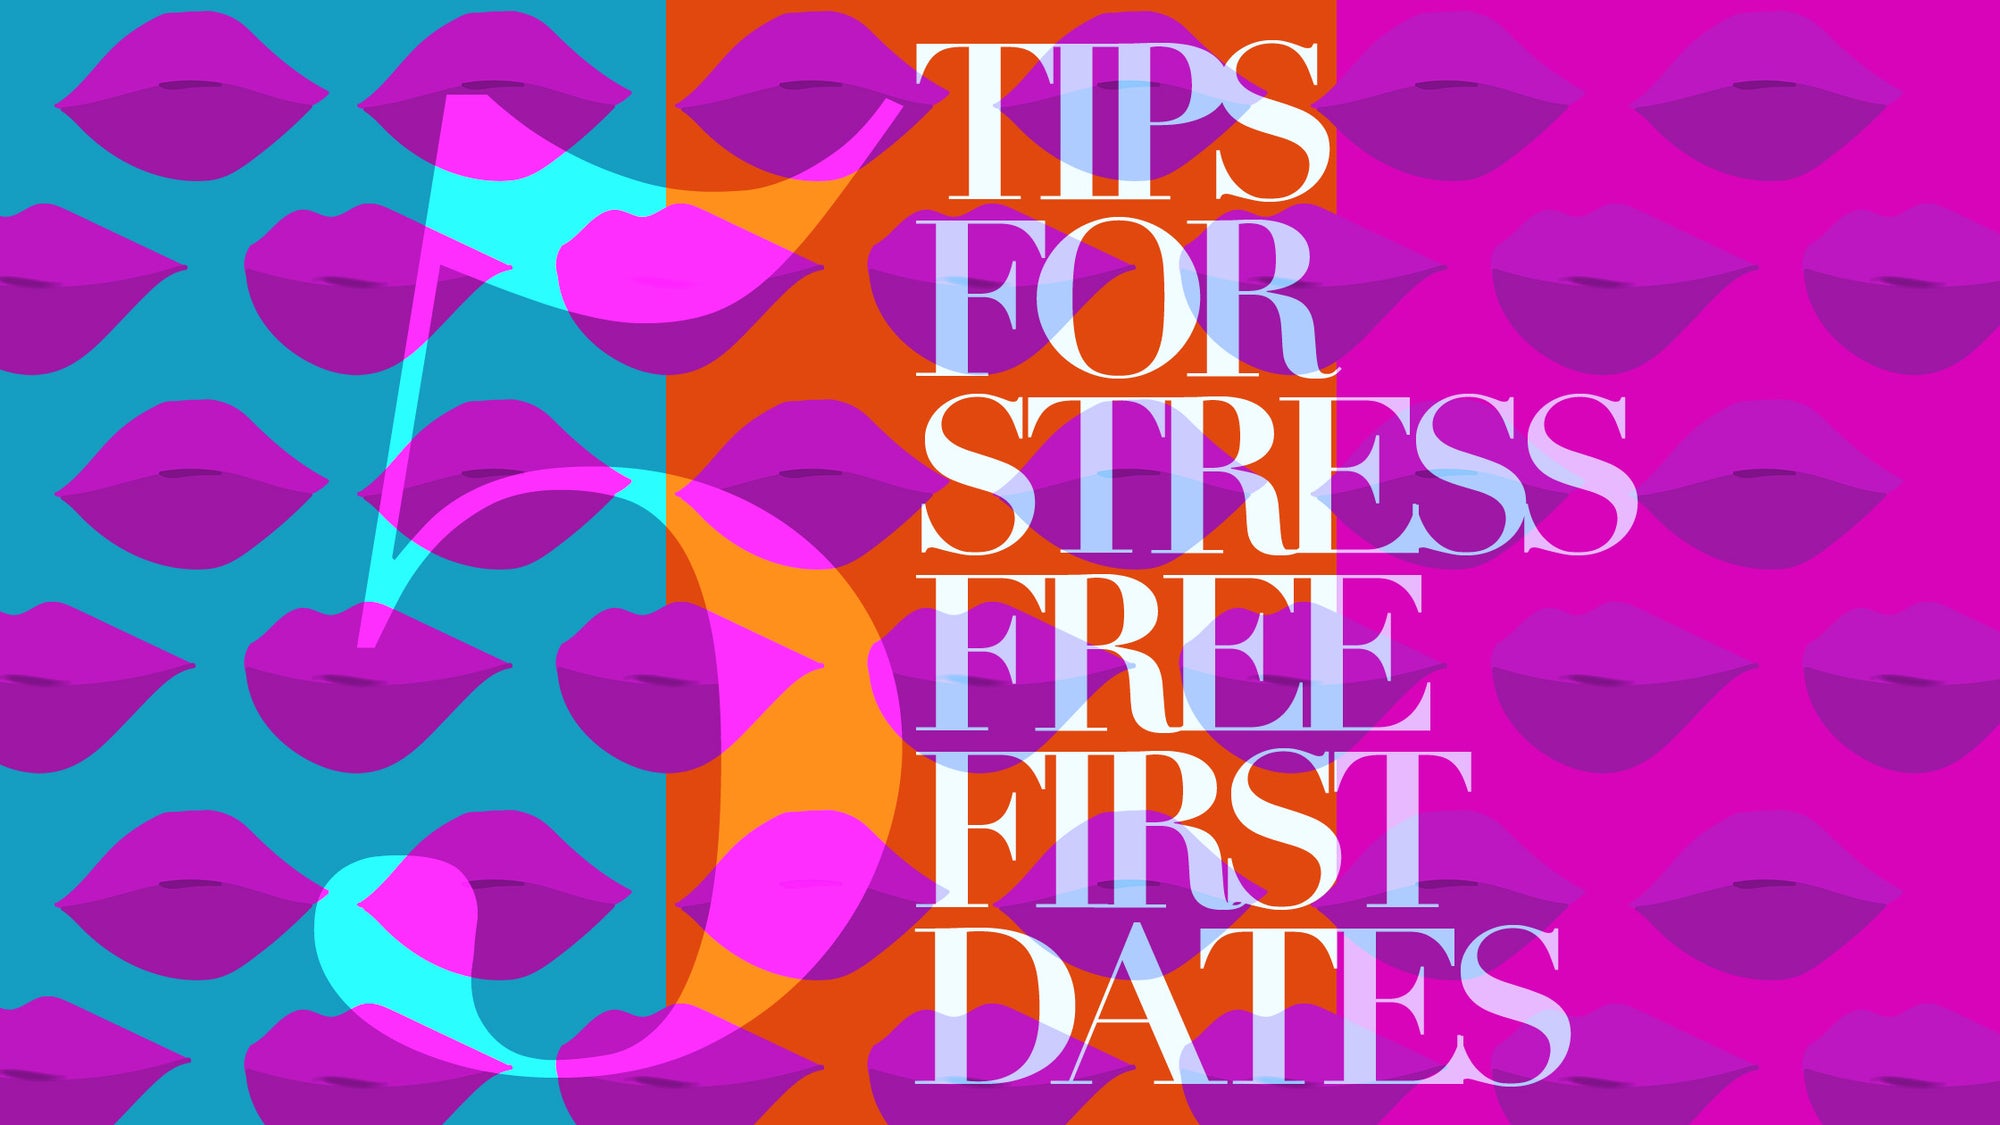 5 Tips for Stress-Free First Dates